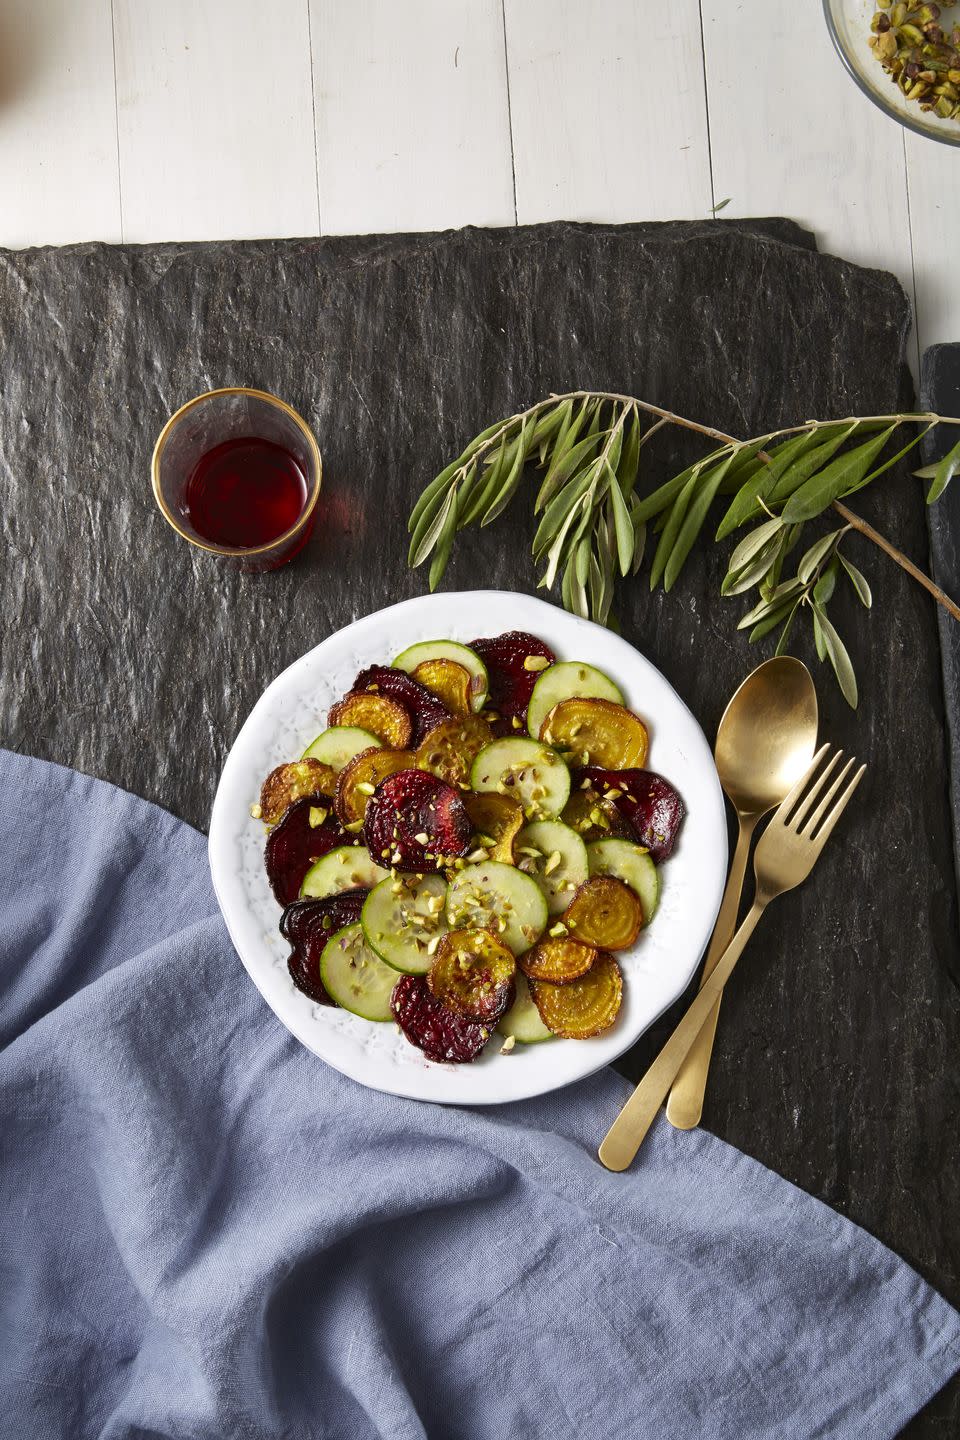 Cucumber Roasted-Beet and Pistachio Salad